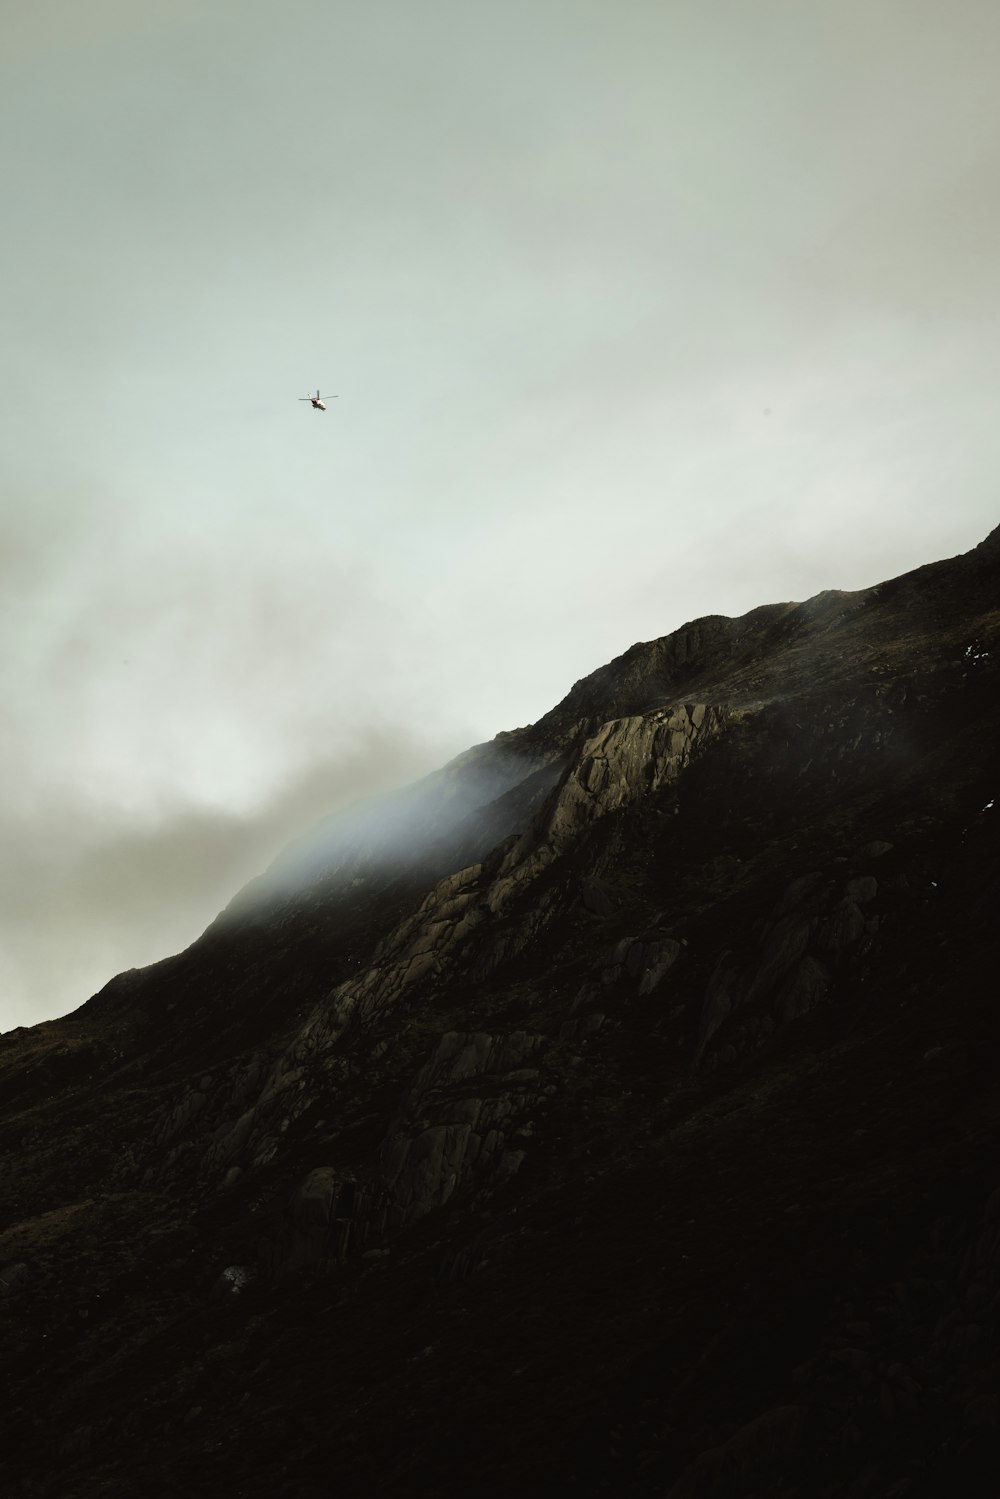 a plane flying over a mountain on a cloudy day